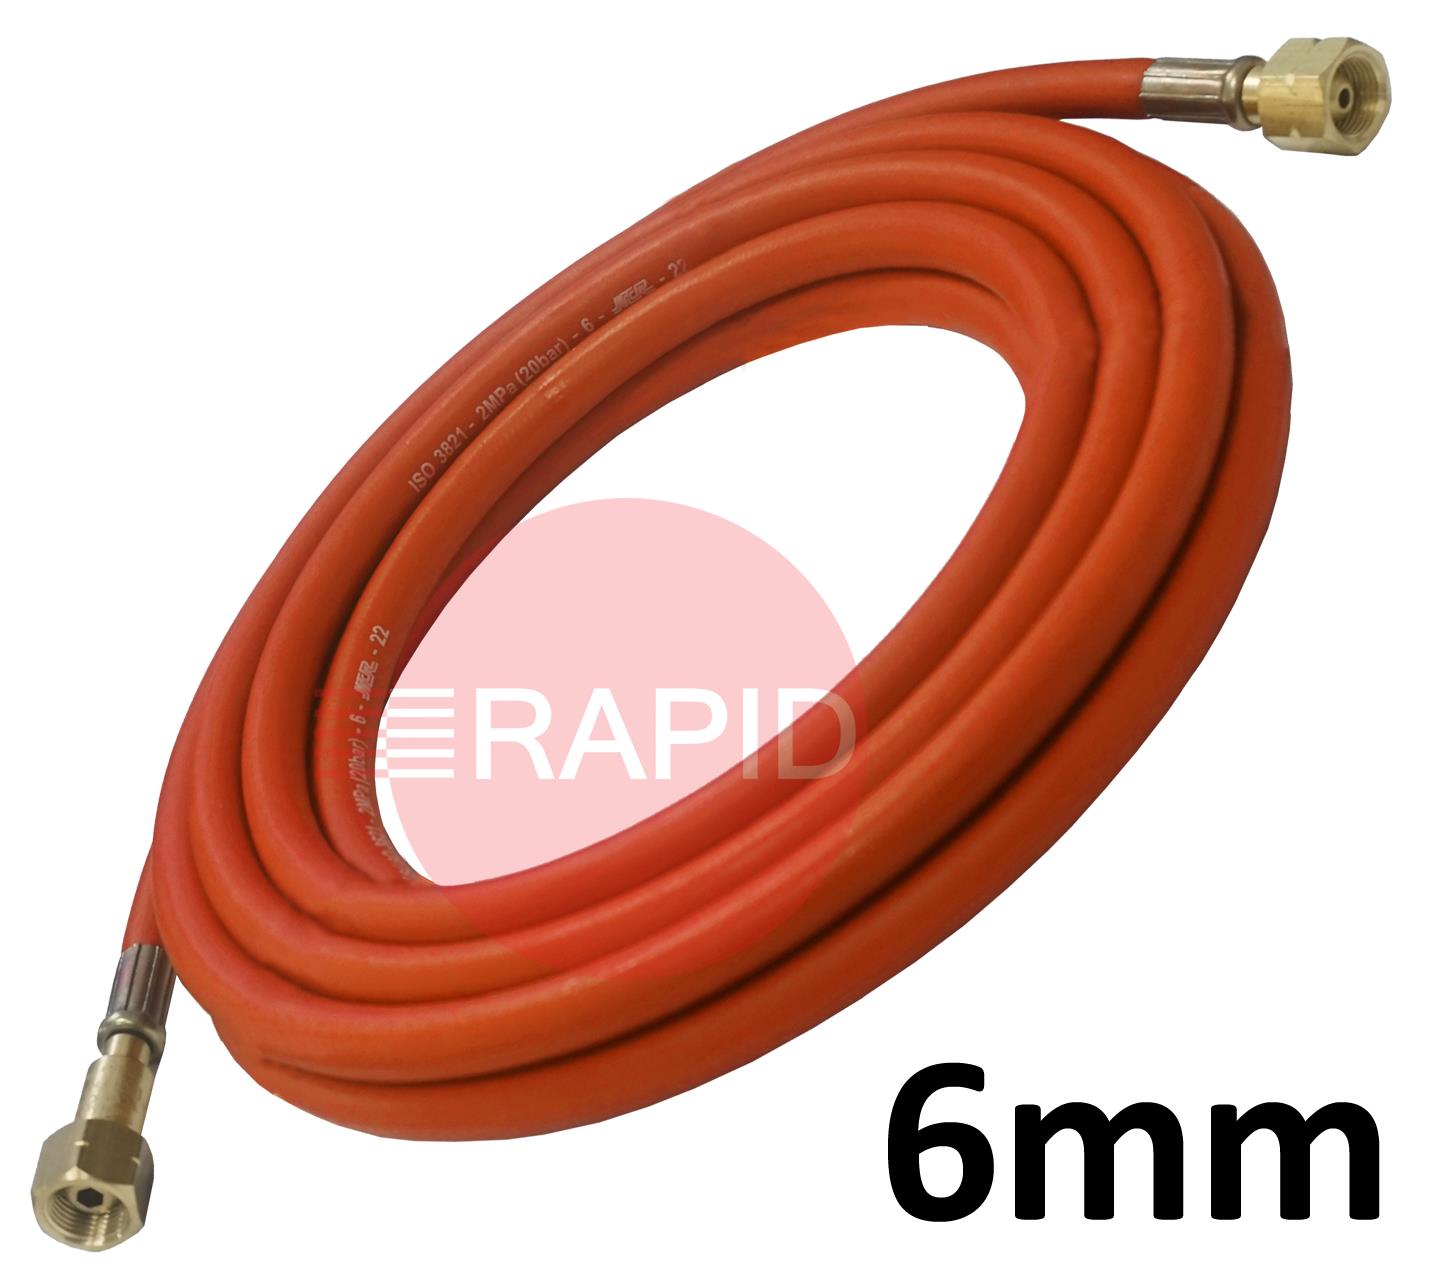 A5142  Fitted Propane Hose. 6mm Bore. G3/8 Check Valve & G3/8 Regulator Connection - 20m